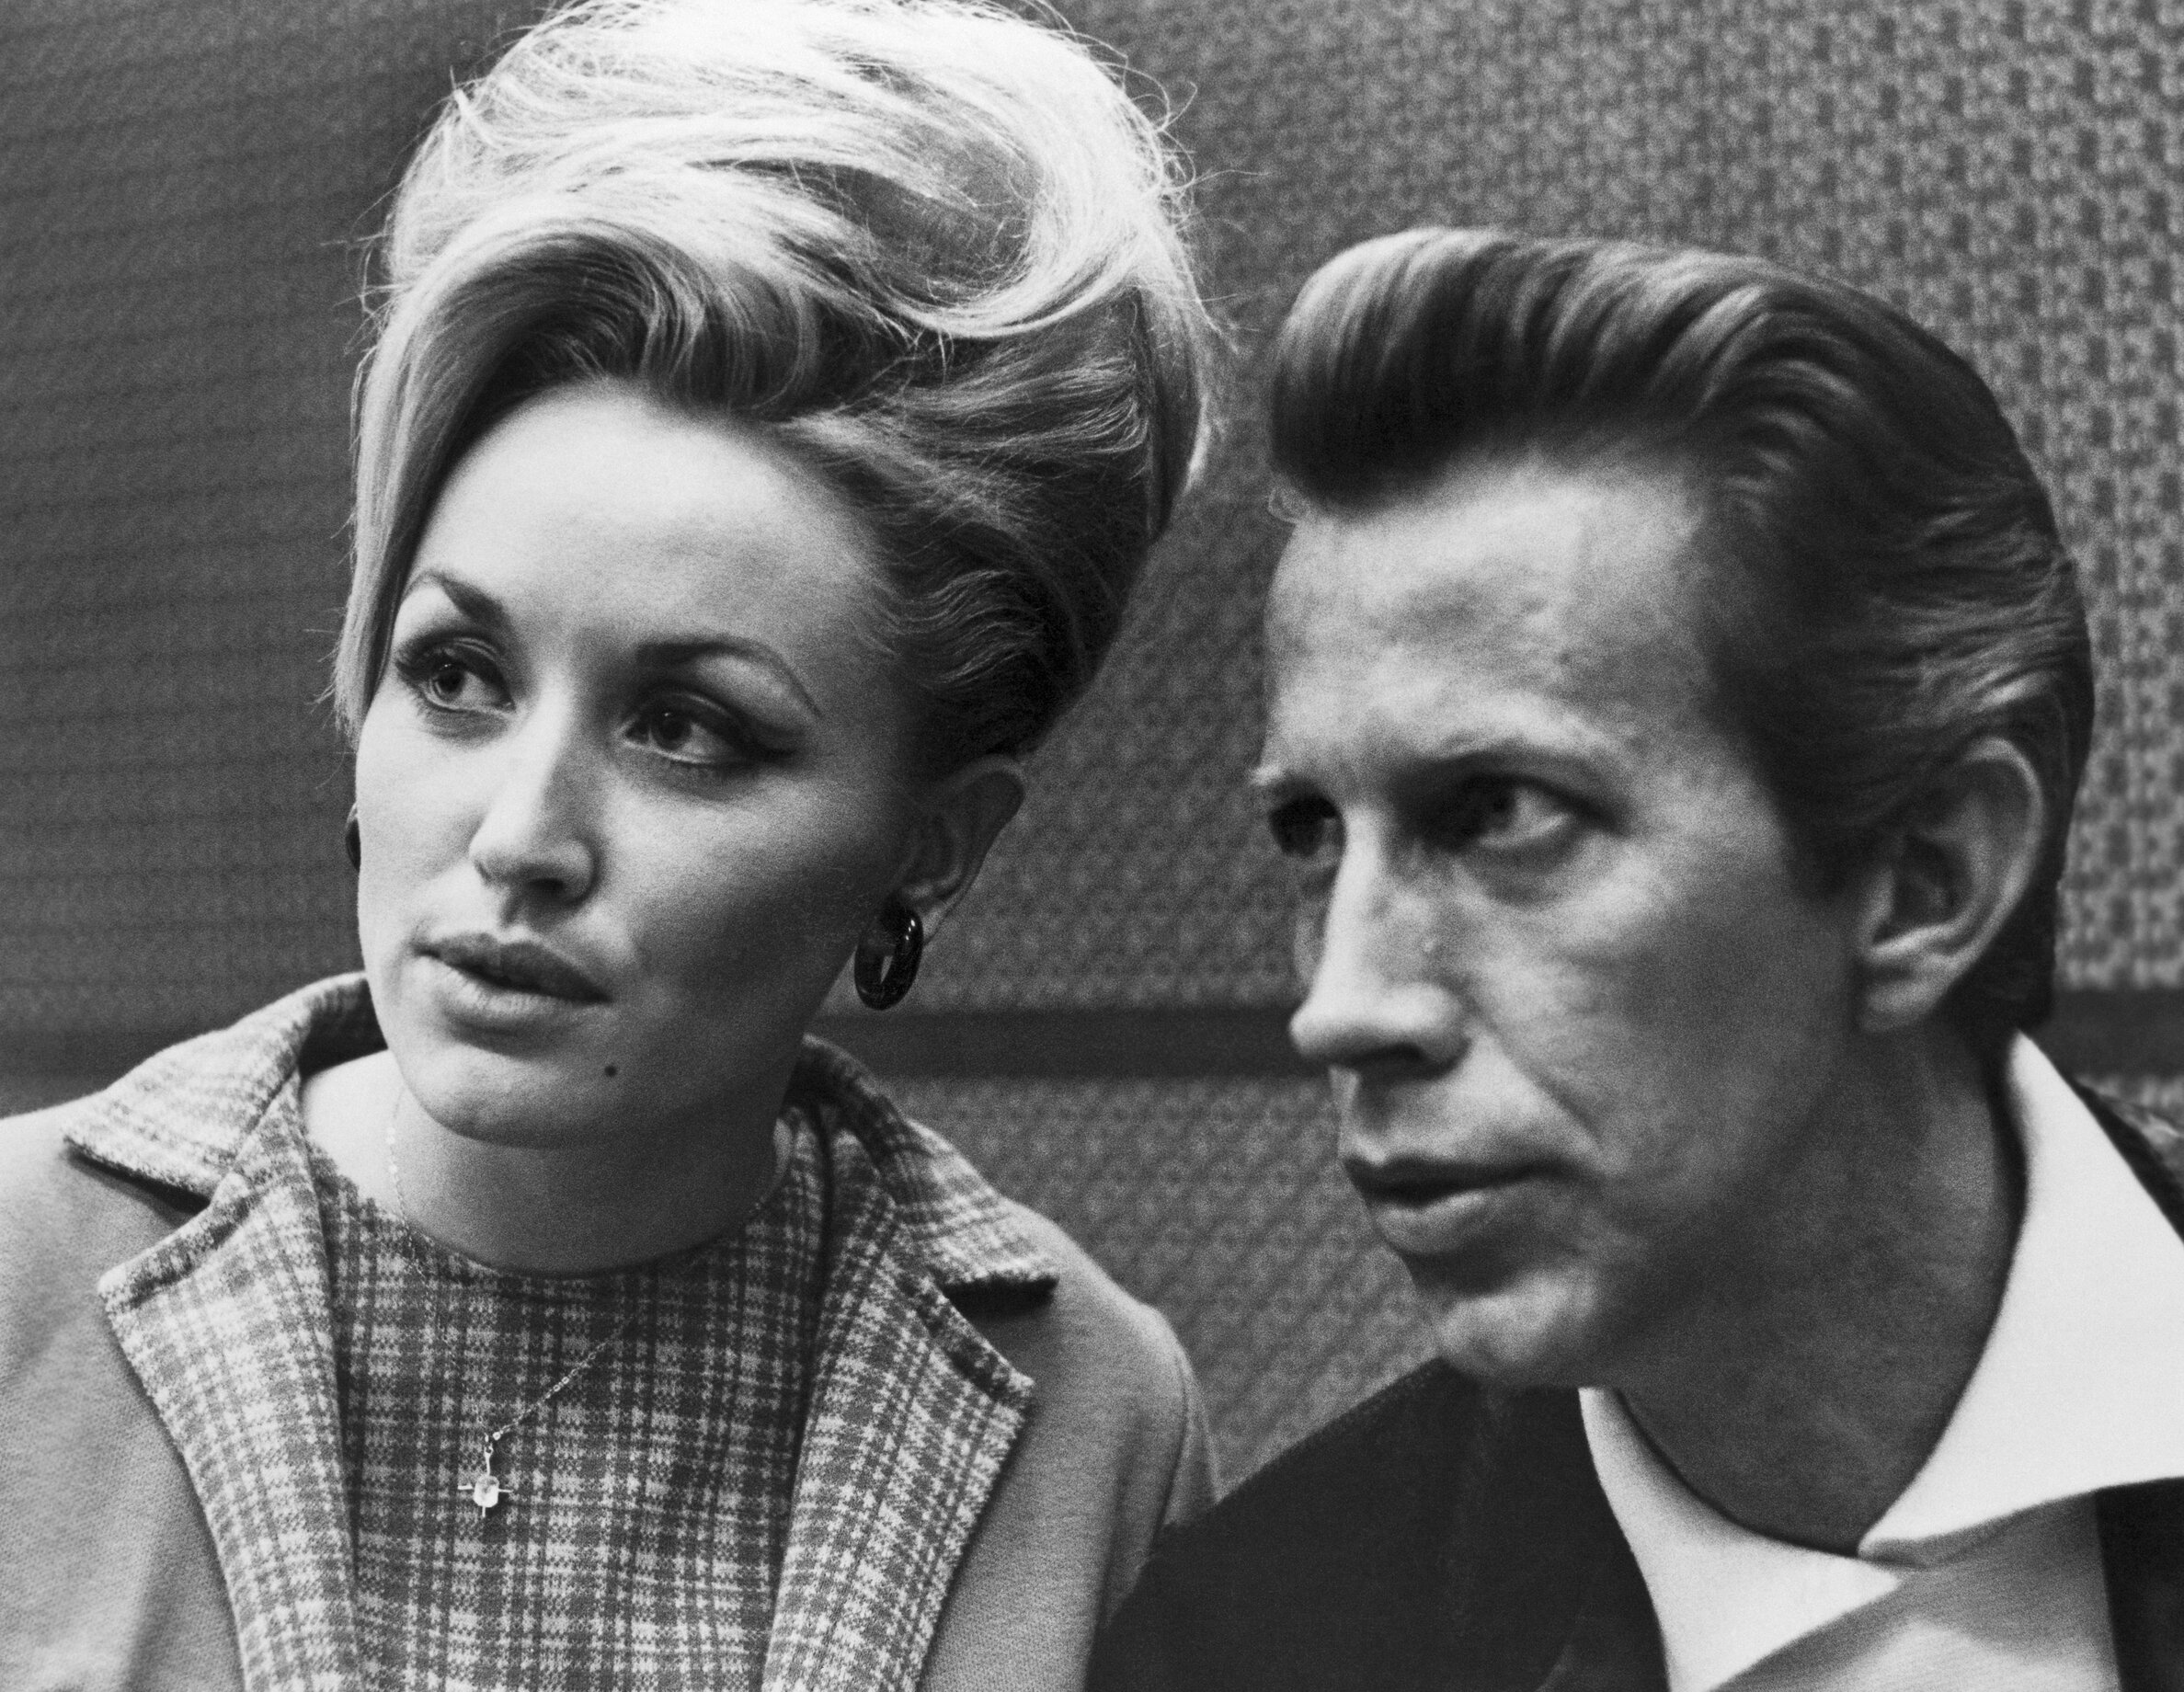 Country singers Dolly Parton and Porter Wagoner in a candid black and white portrait in 1968 in Nashville, Tennessee.